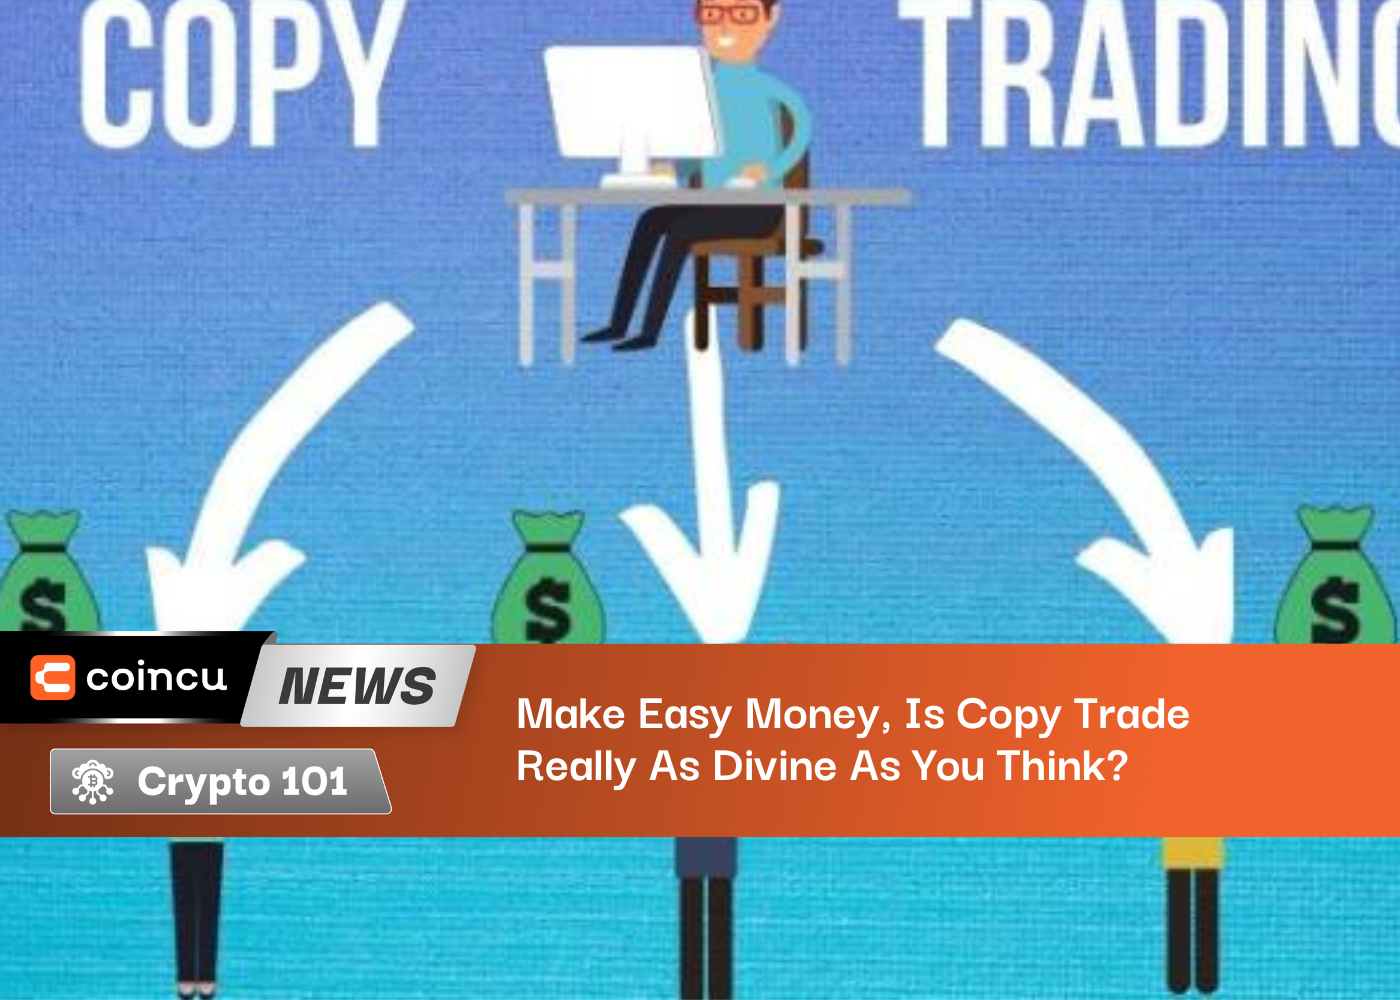 Make Easy Money, Is Copy Trade Really As Divine As You Think?